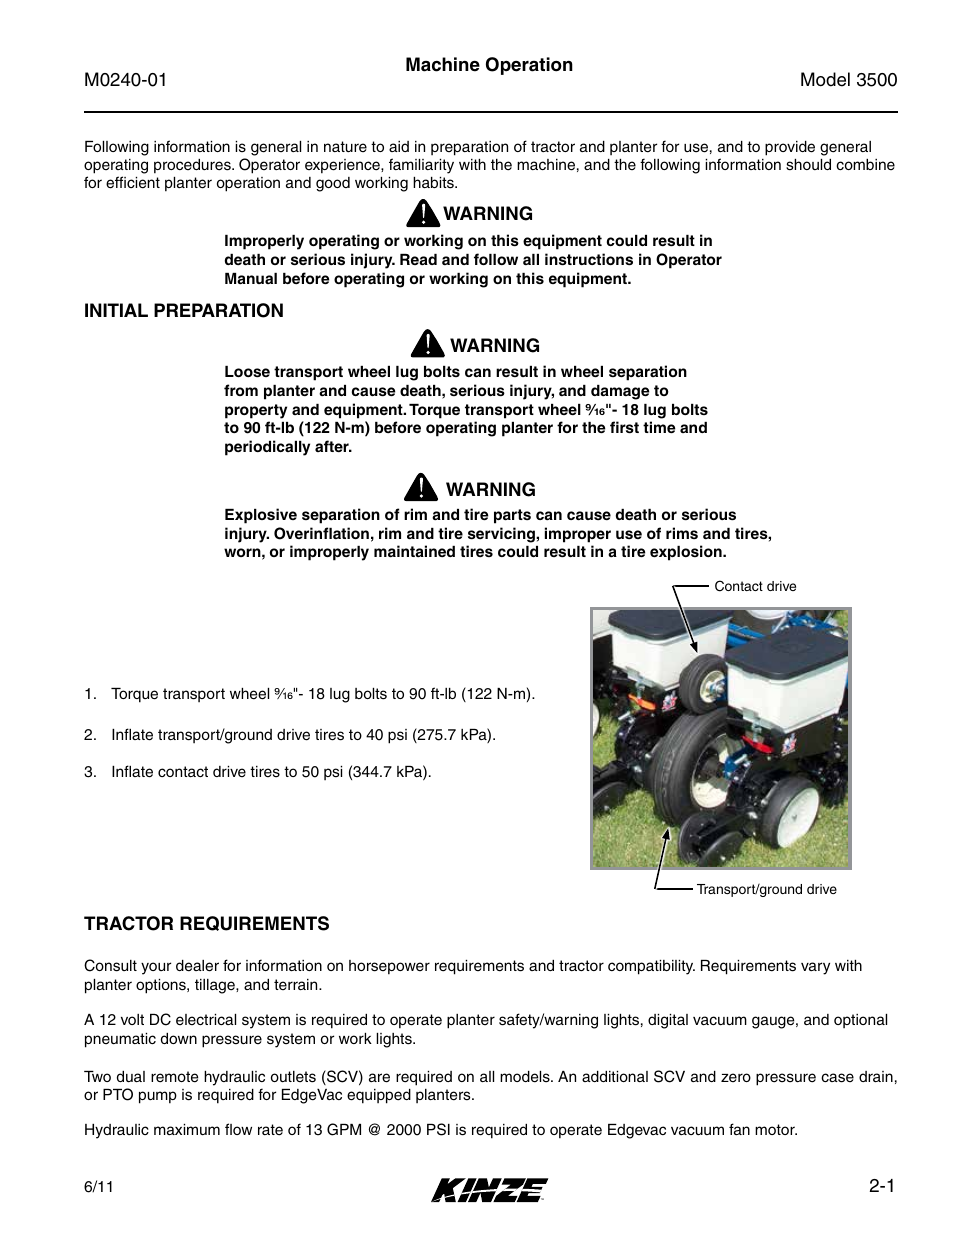 Initial preparation, Tractor requirements, Initial preparation -1 | Tractor requirements -1 | Kinze 3500 Lift and Rotate Planter Rev. 7/14 User Manual | Page 13 / 140